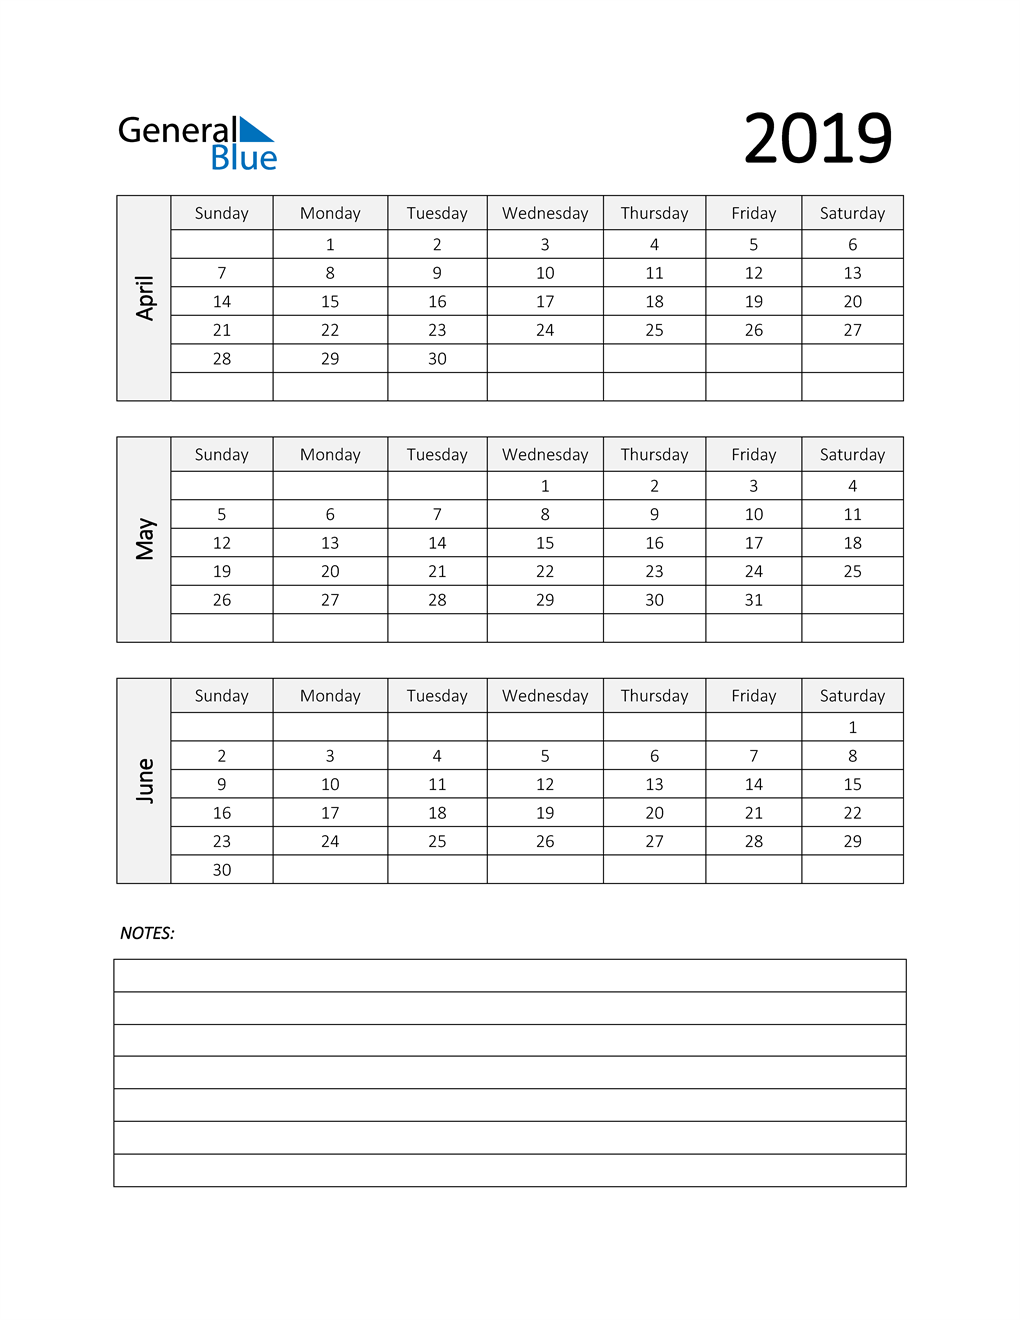  Q2 2019 Calendar with Notes